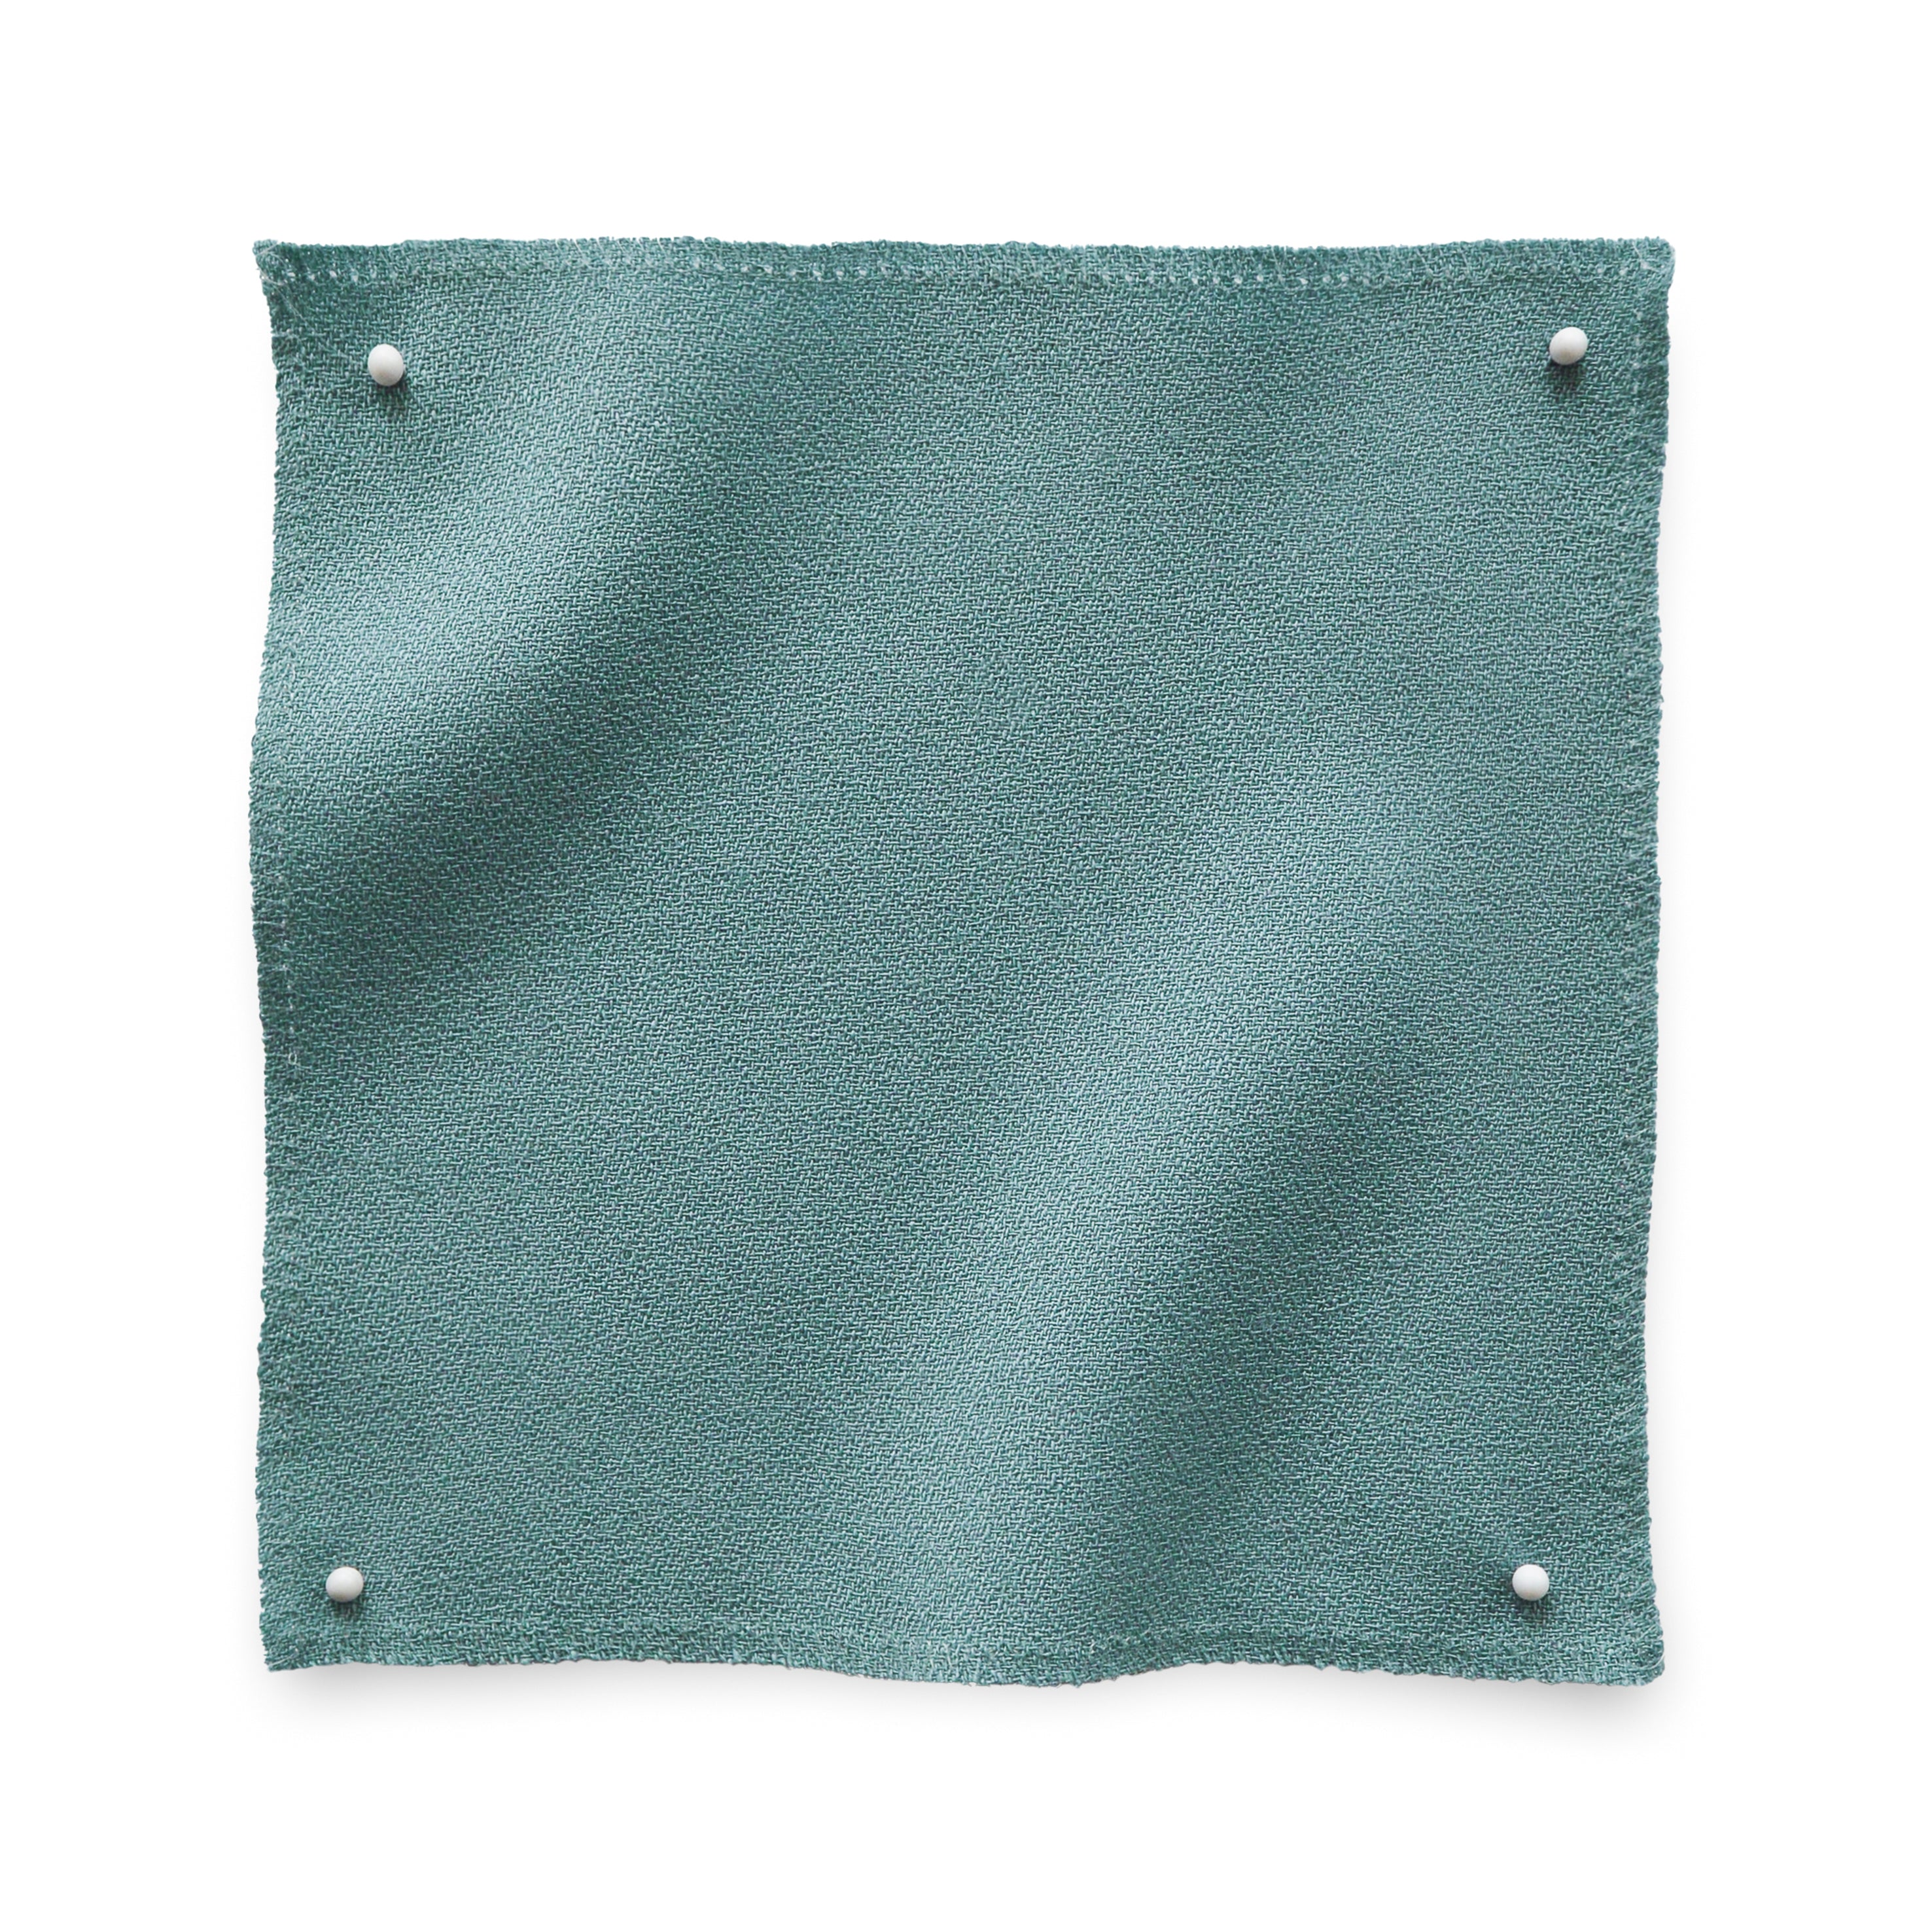 Wool crepe swatch pinned in all corners in sea green